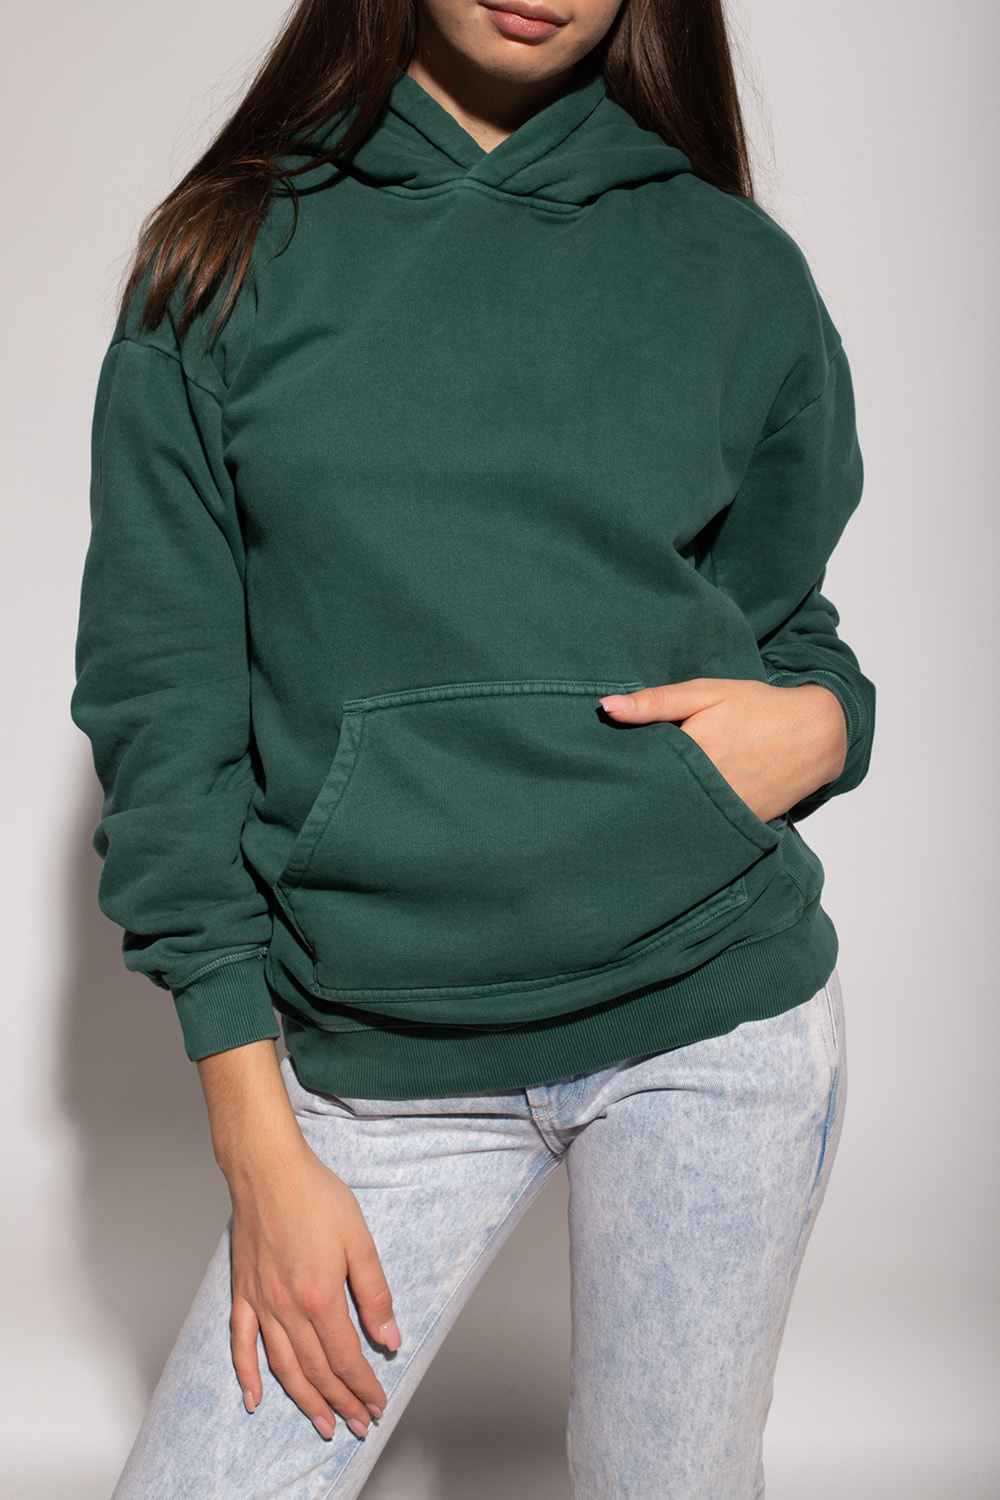 Green 'Made & Crafted®' collection hoodie Levi's - Vitkac Slovakia